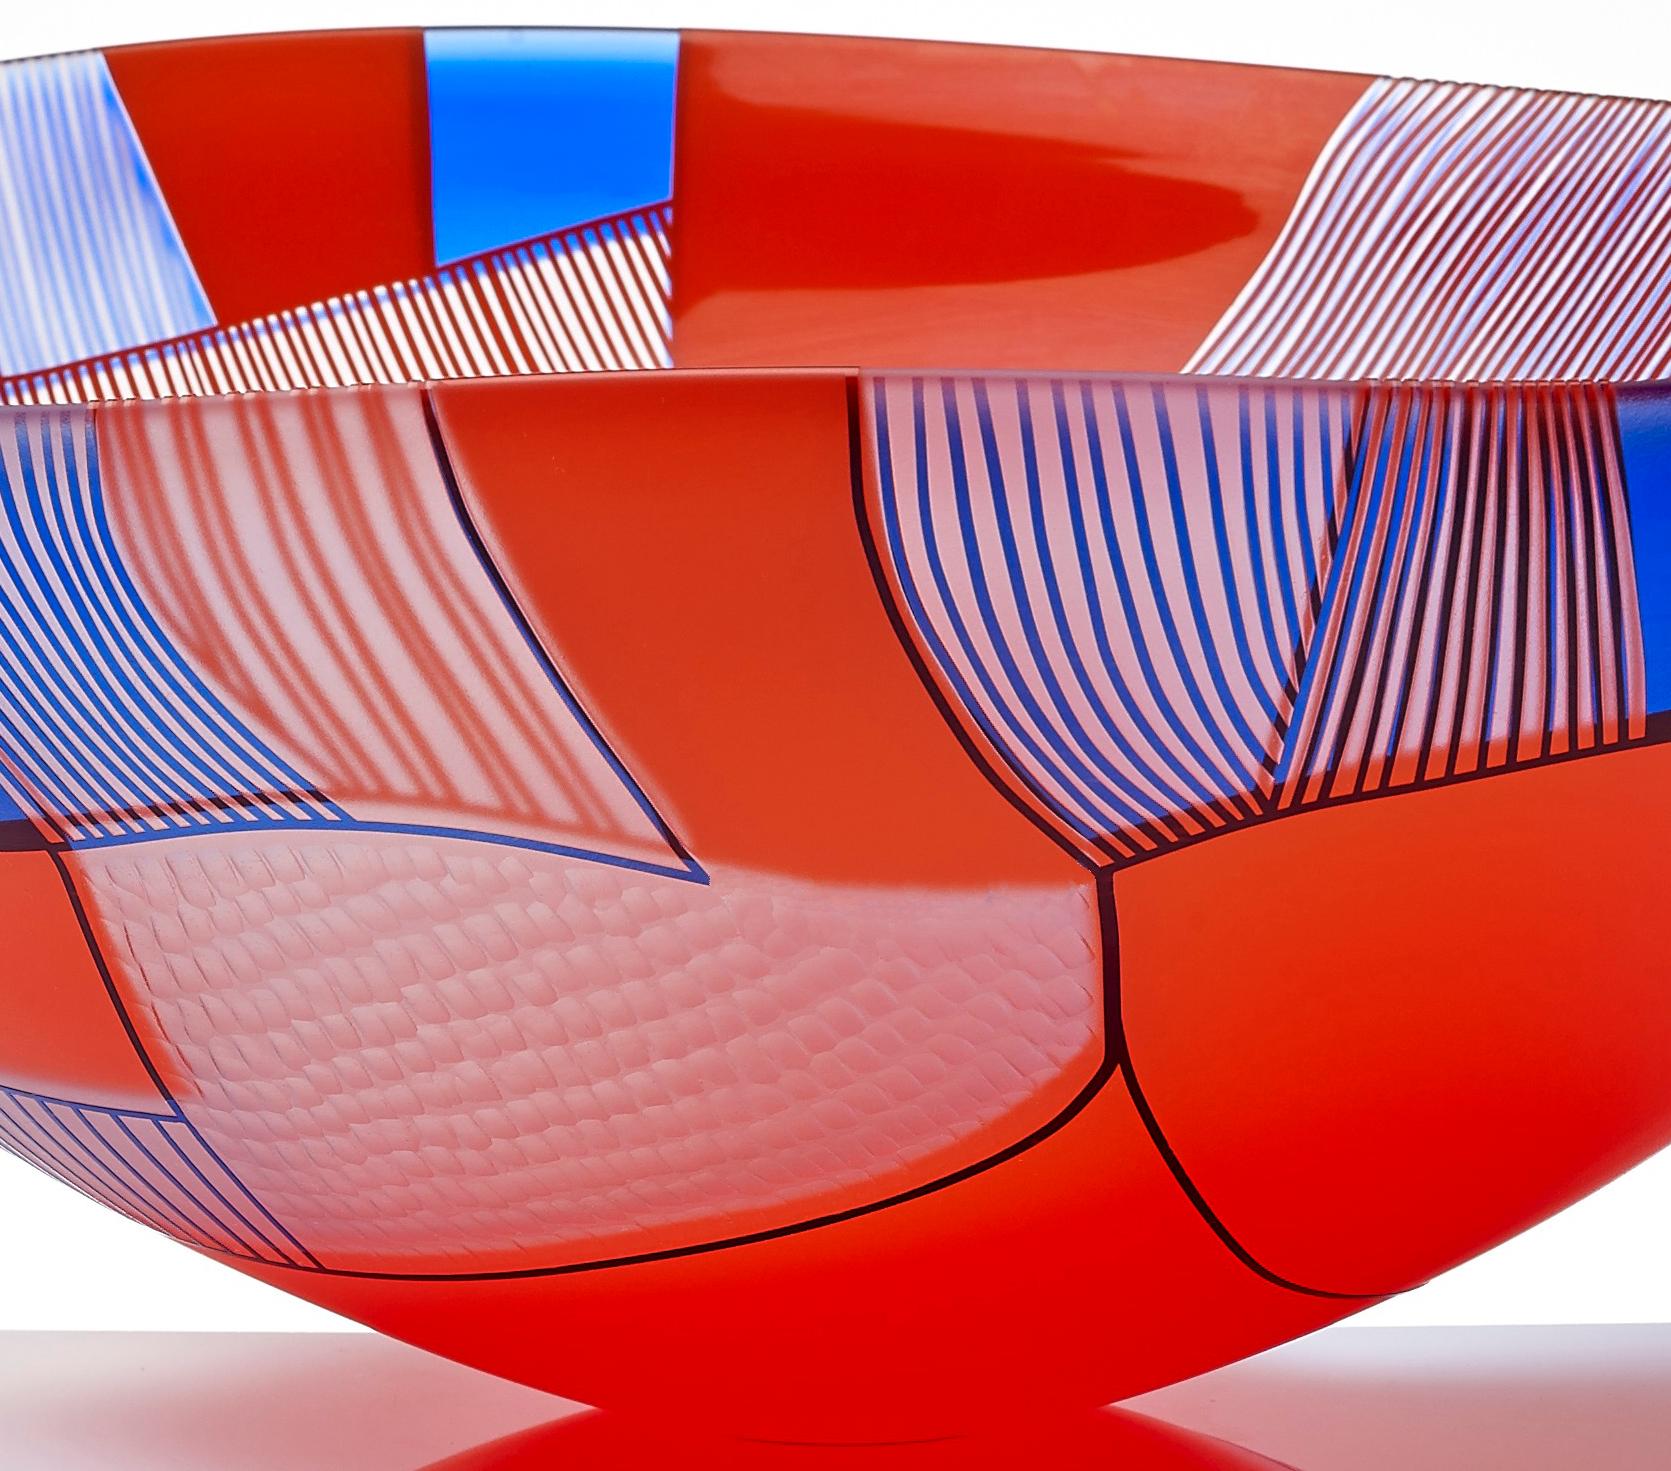 Hand-Crafted Landscape Study Blue Over Red bowl, art glass centrepiece by Kate Jones 